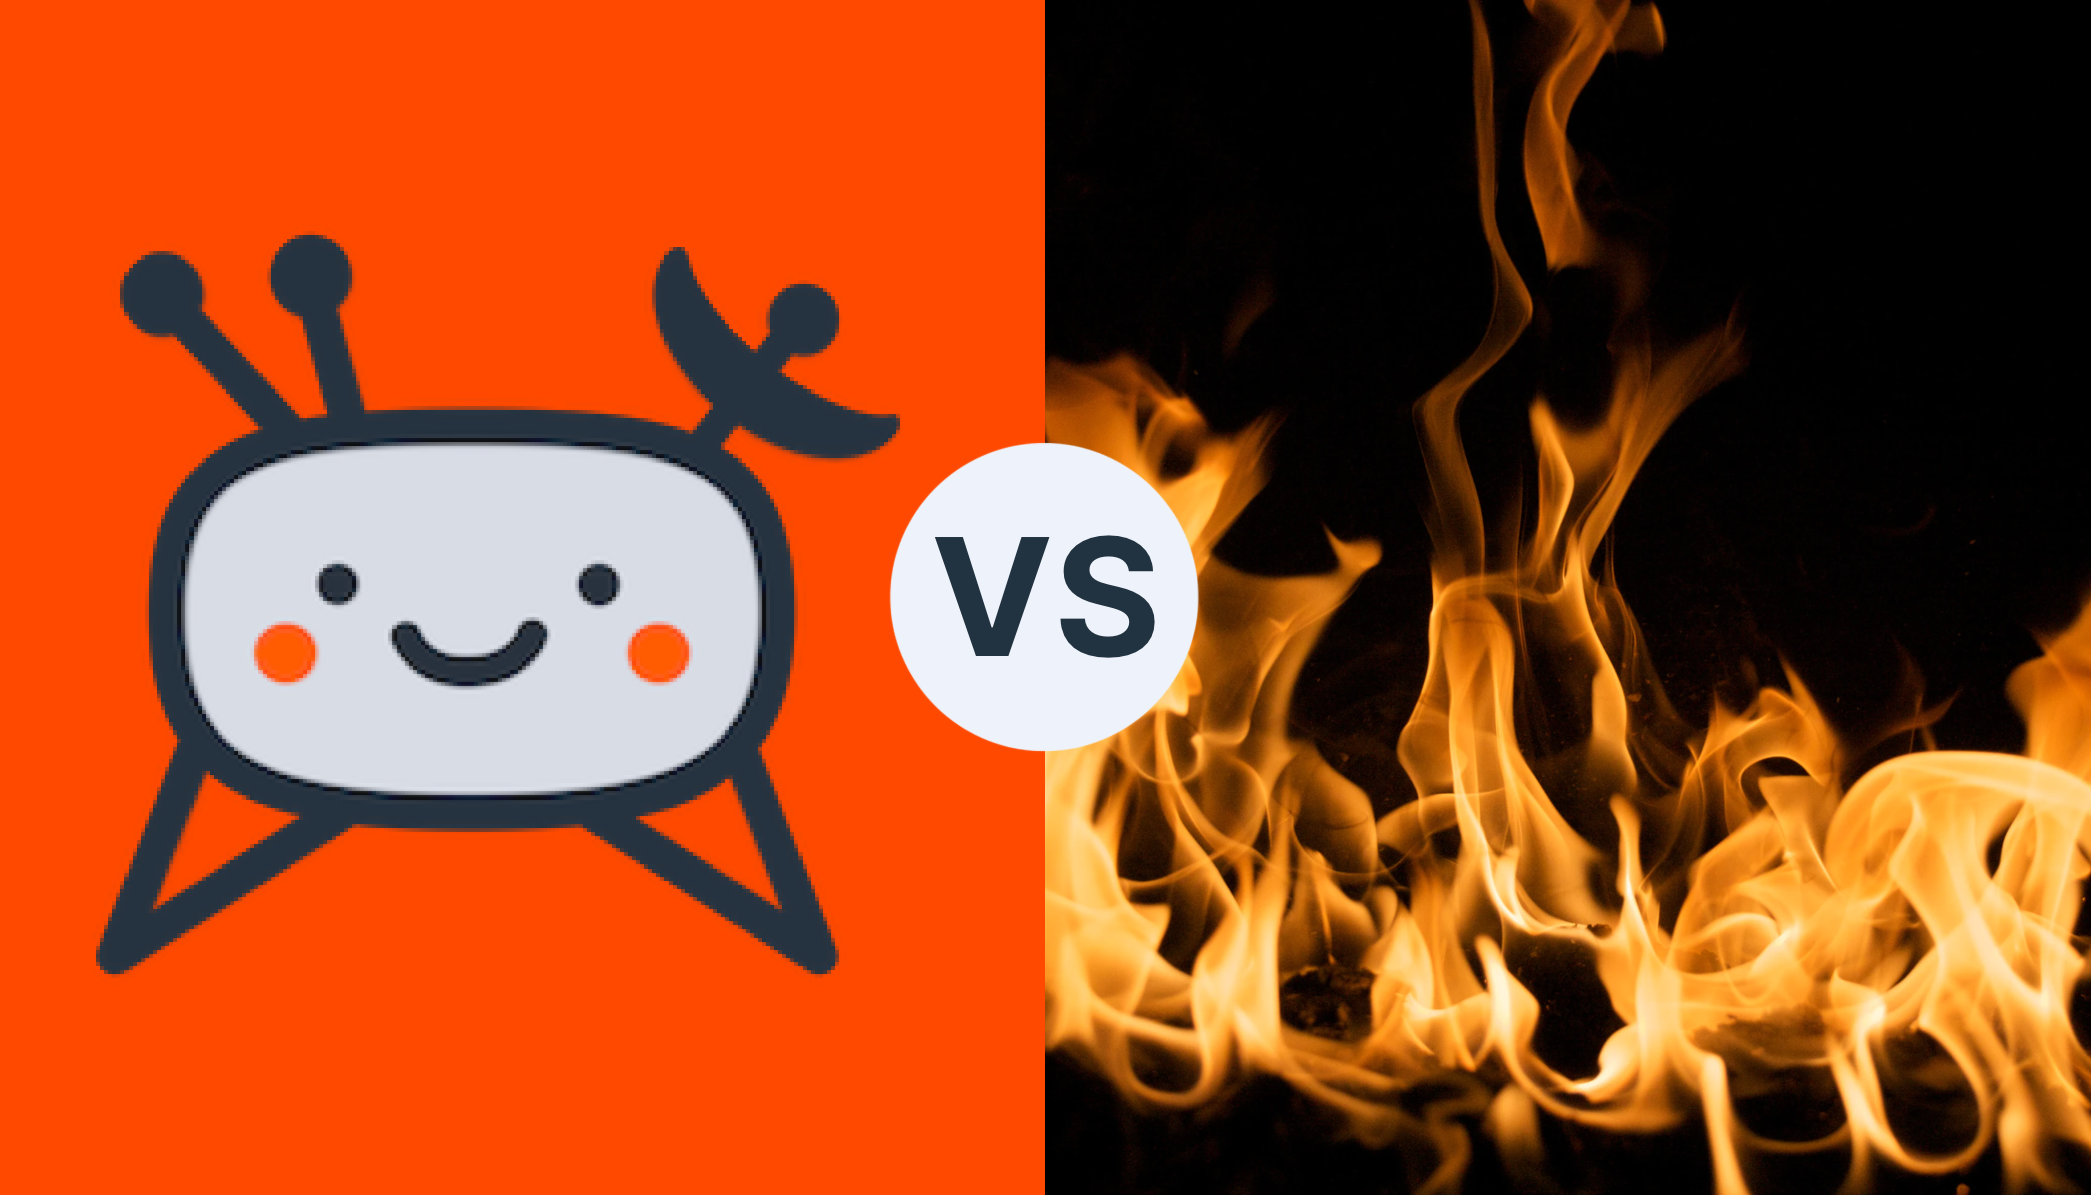 The TelemetryDeck mascot ‘Sondrine’ on the left side, versus fire on a black background for Google Firebase on the right side